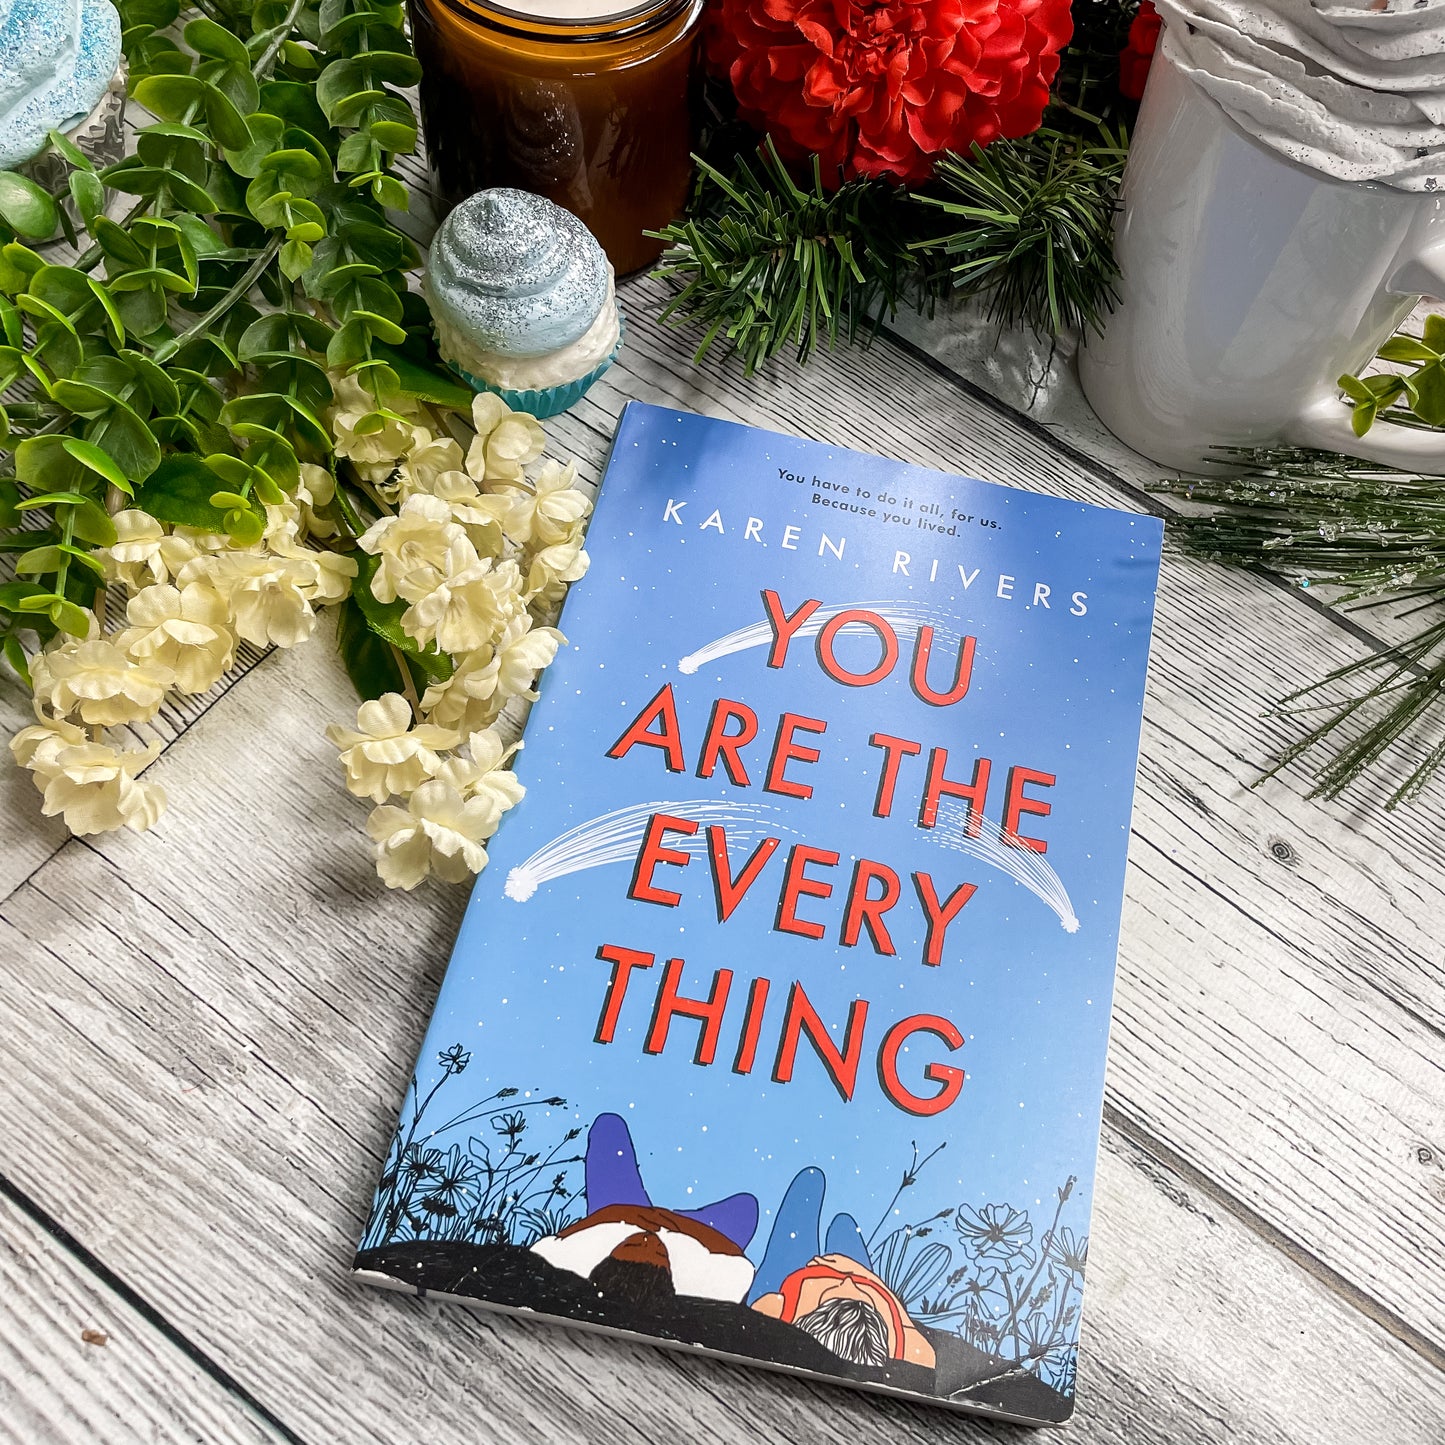 You Are The Everything by Karen Rivers